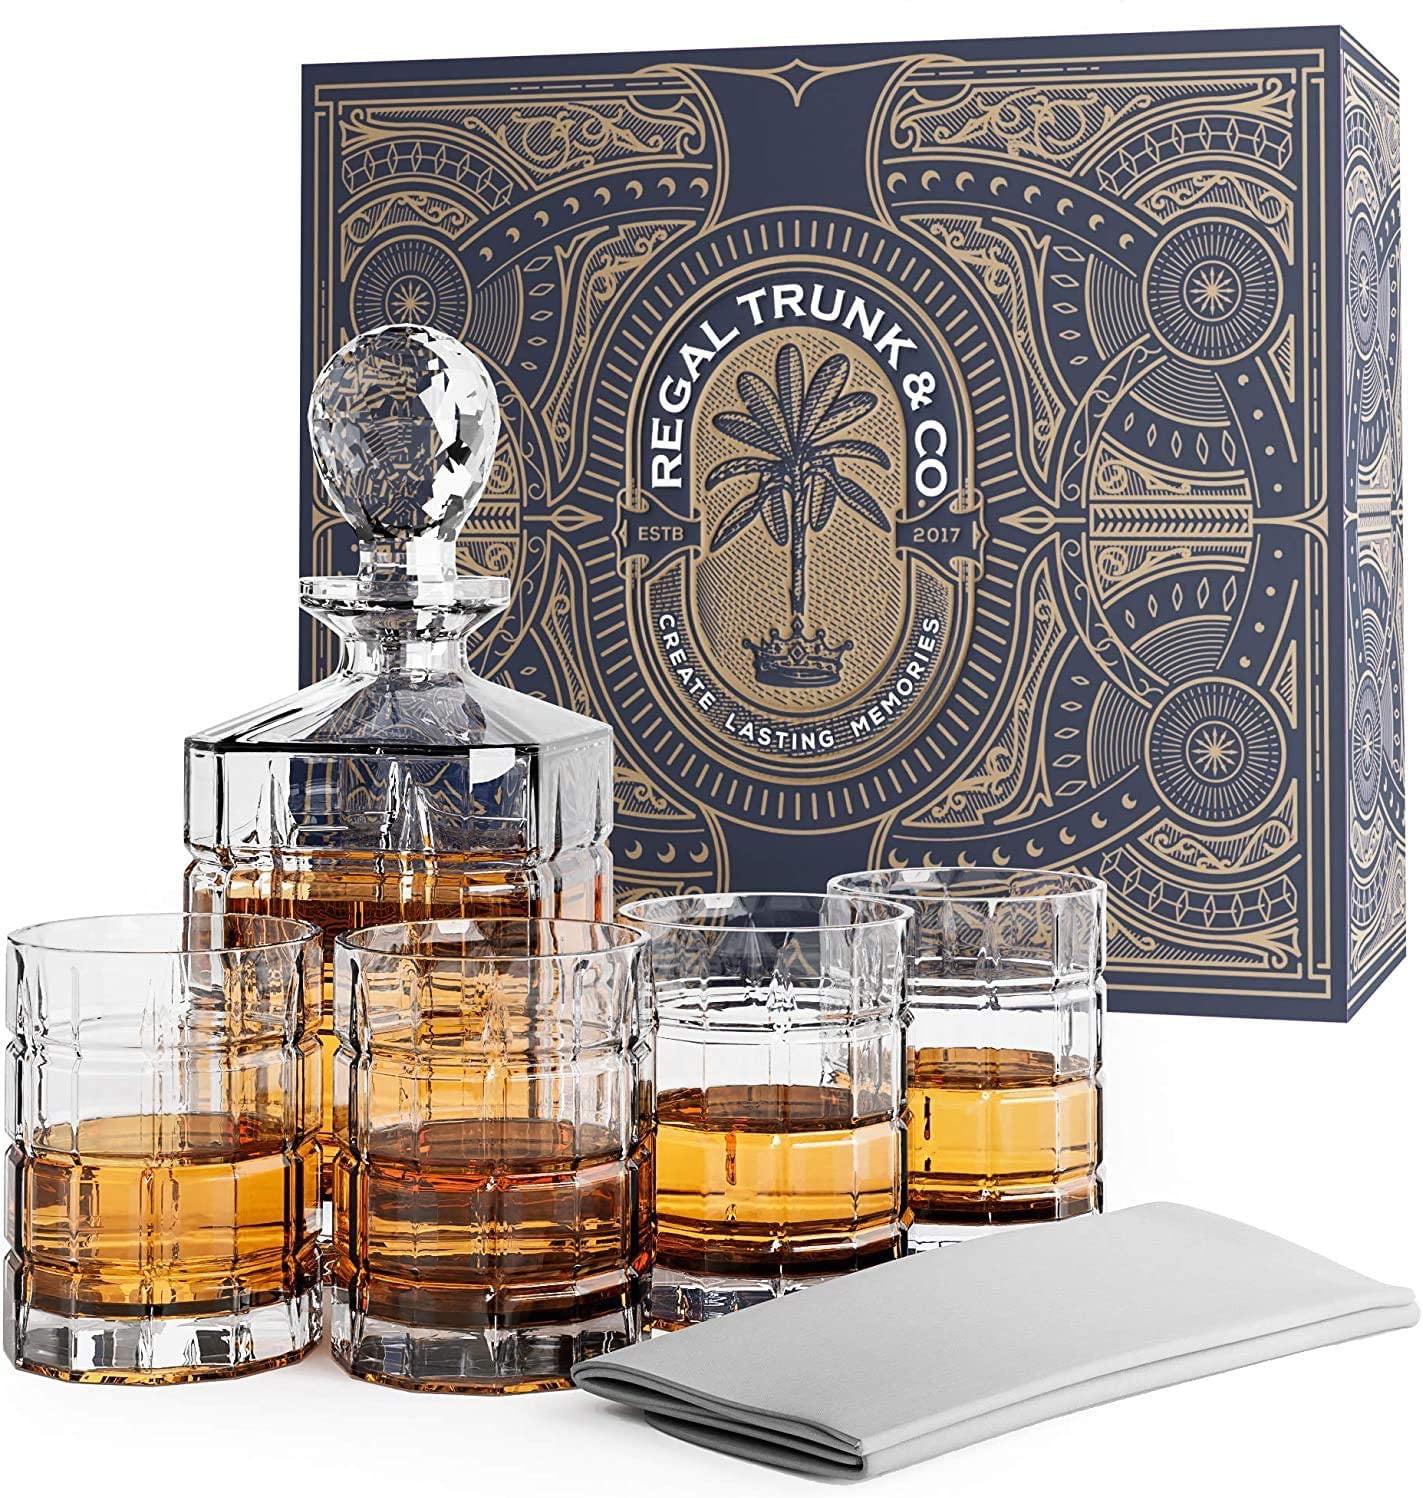 4 Whisky Glasses Tumbler Set High-end European Style Whisky Decanter Set With Magnetic Gift Box Exquisite Diamond Design Wine Decanter Carafe Perfect Whiskey Decanter Set for Scotch Bourbon 